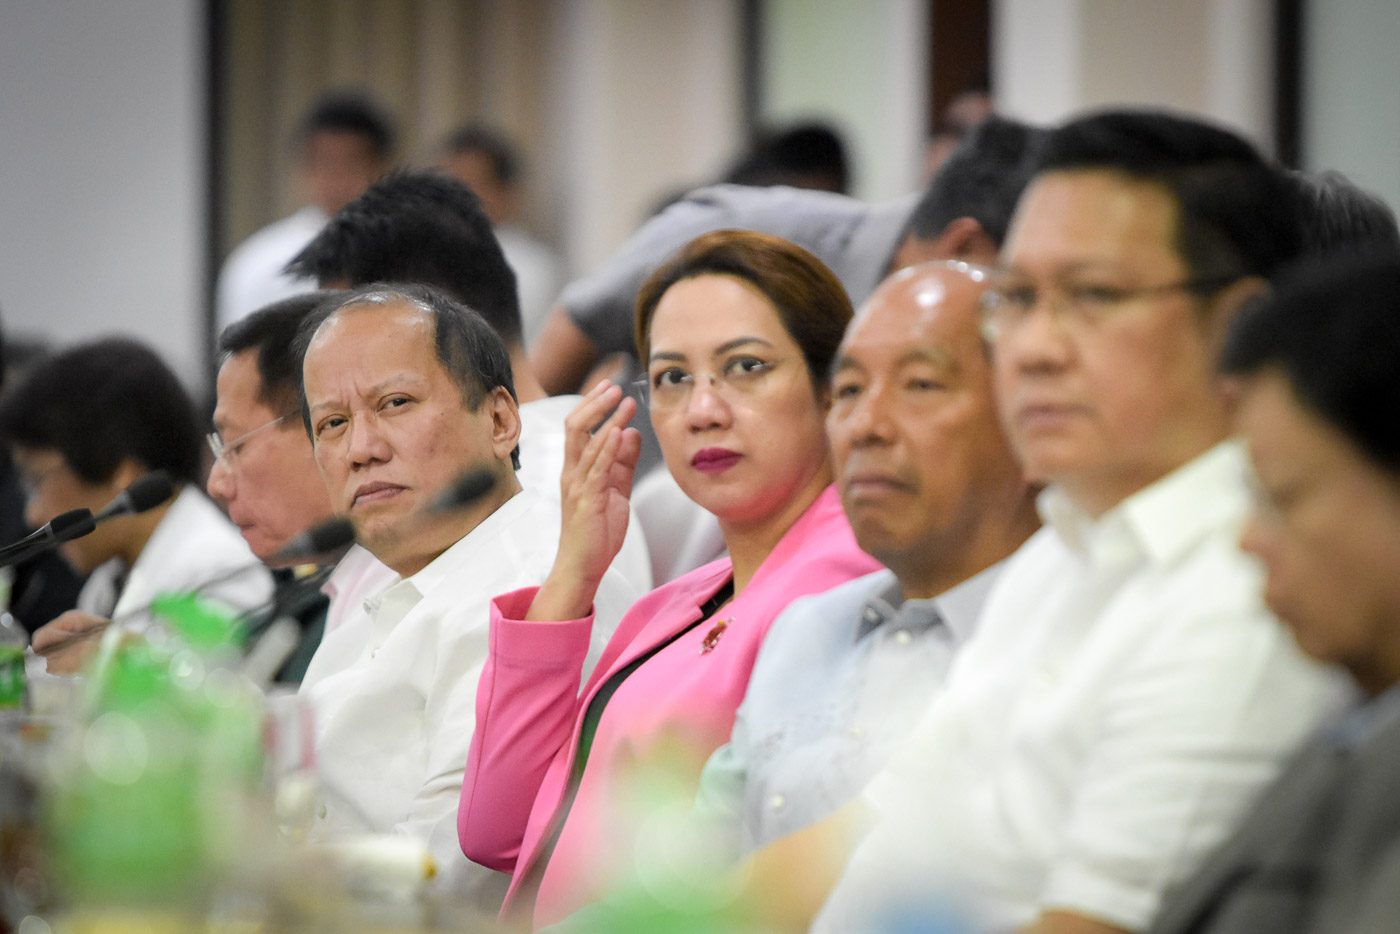 Former budget chief Abad: Dengvaxia decision ‘guided by prudence’